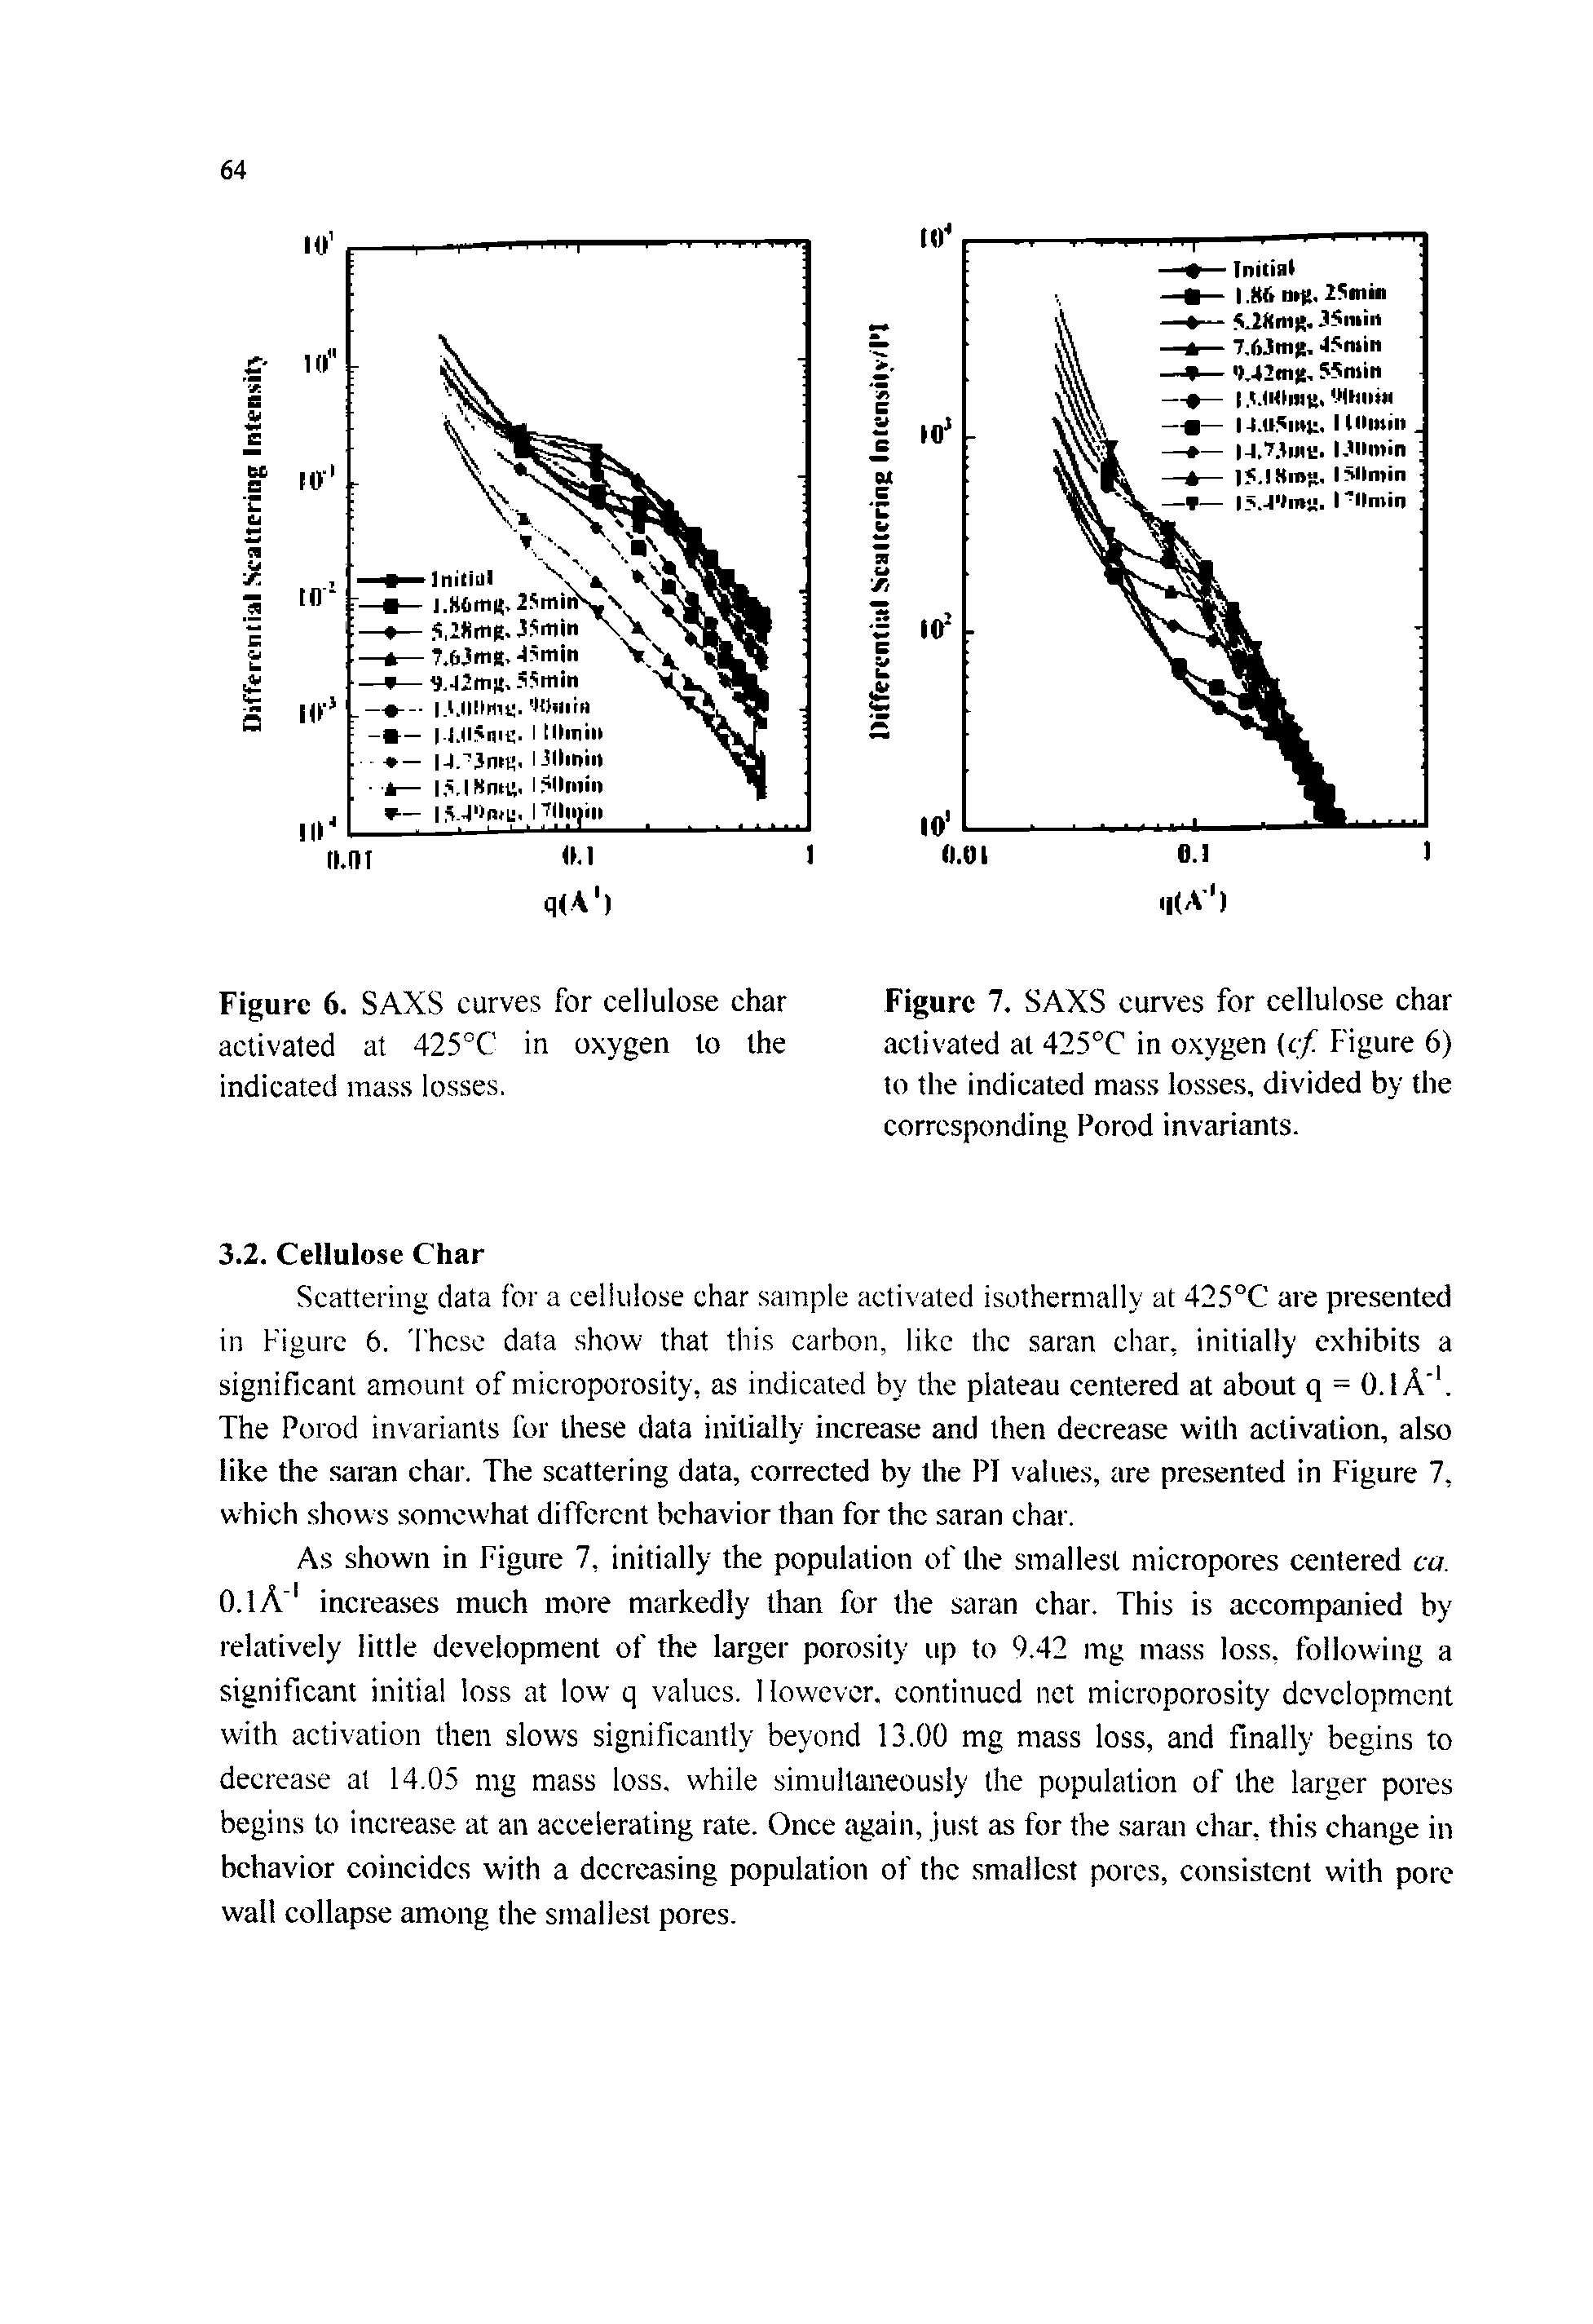 Figure 6. SAXS curves for cellulose char activated at 425°C in oxygen to the indicated mass losses.